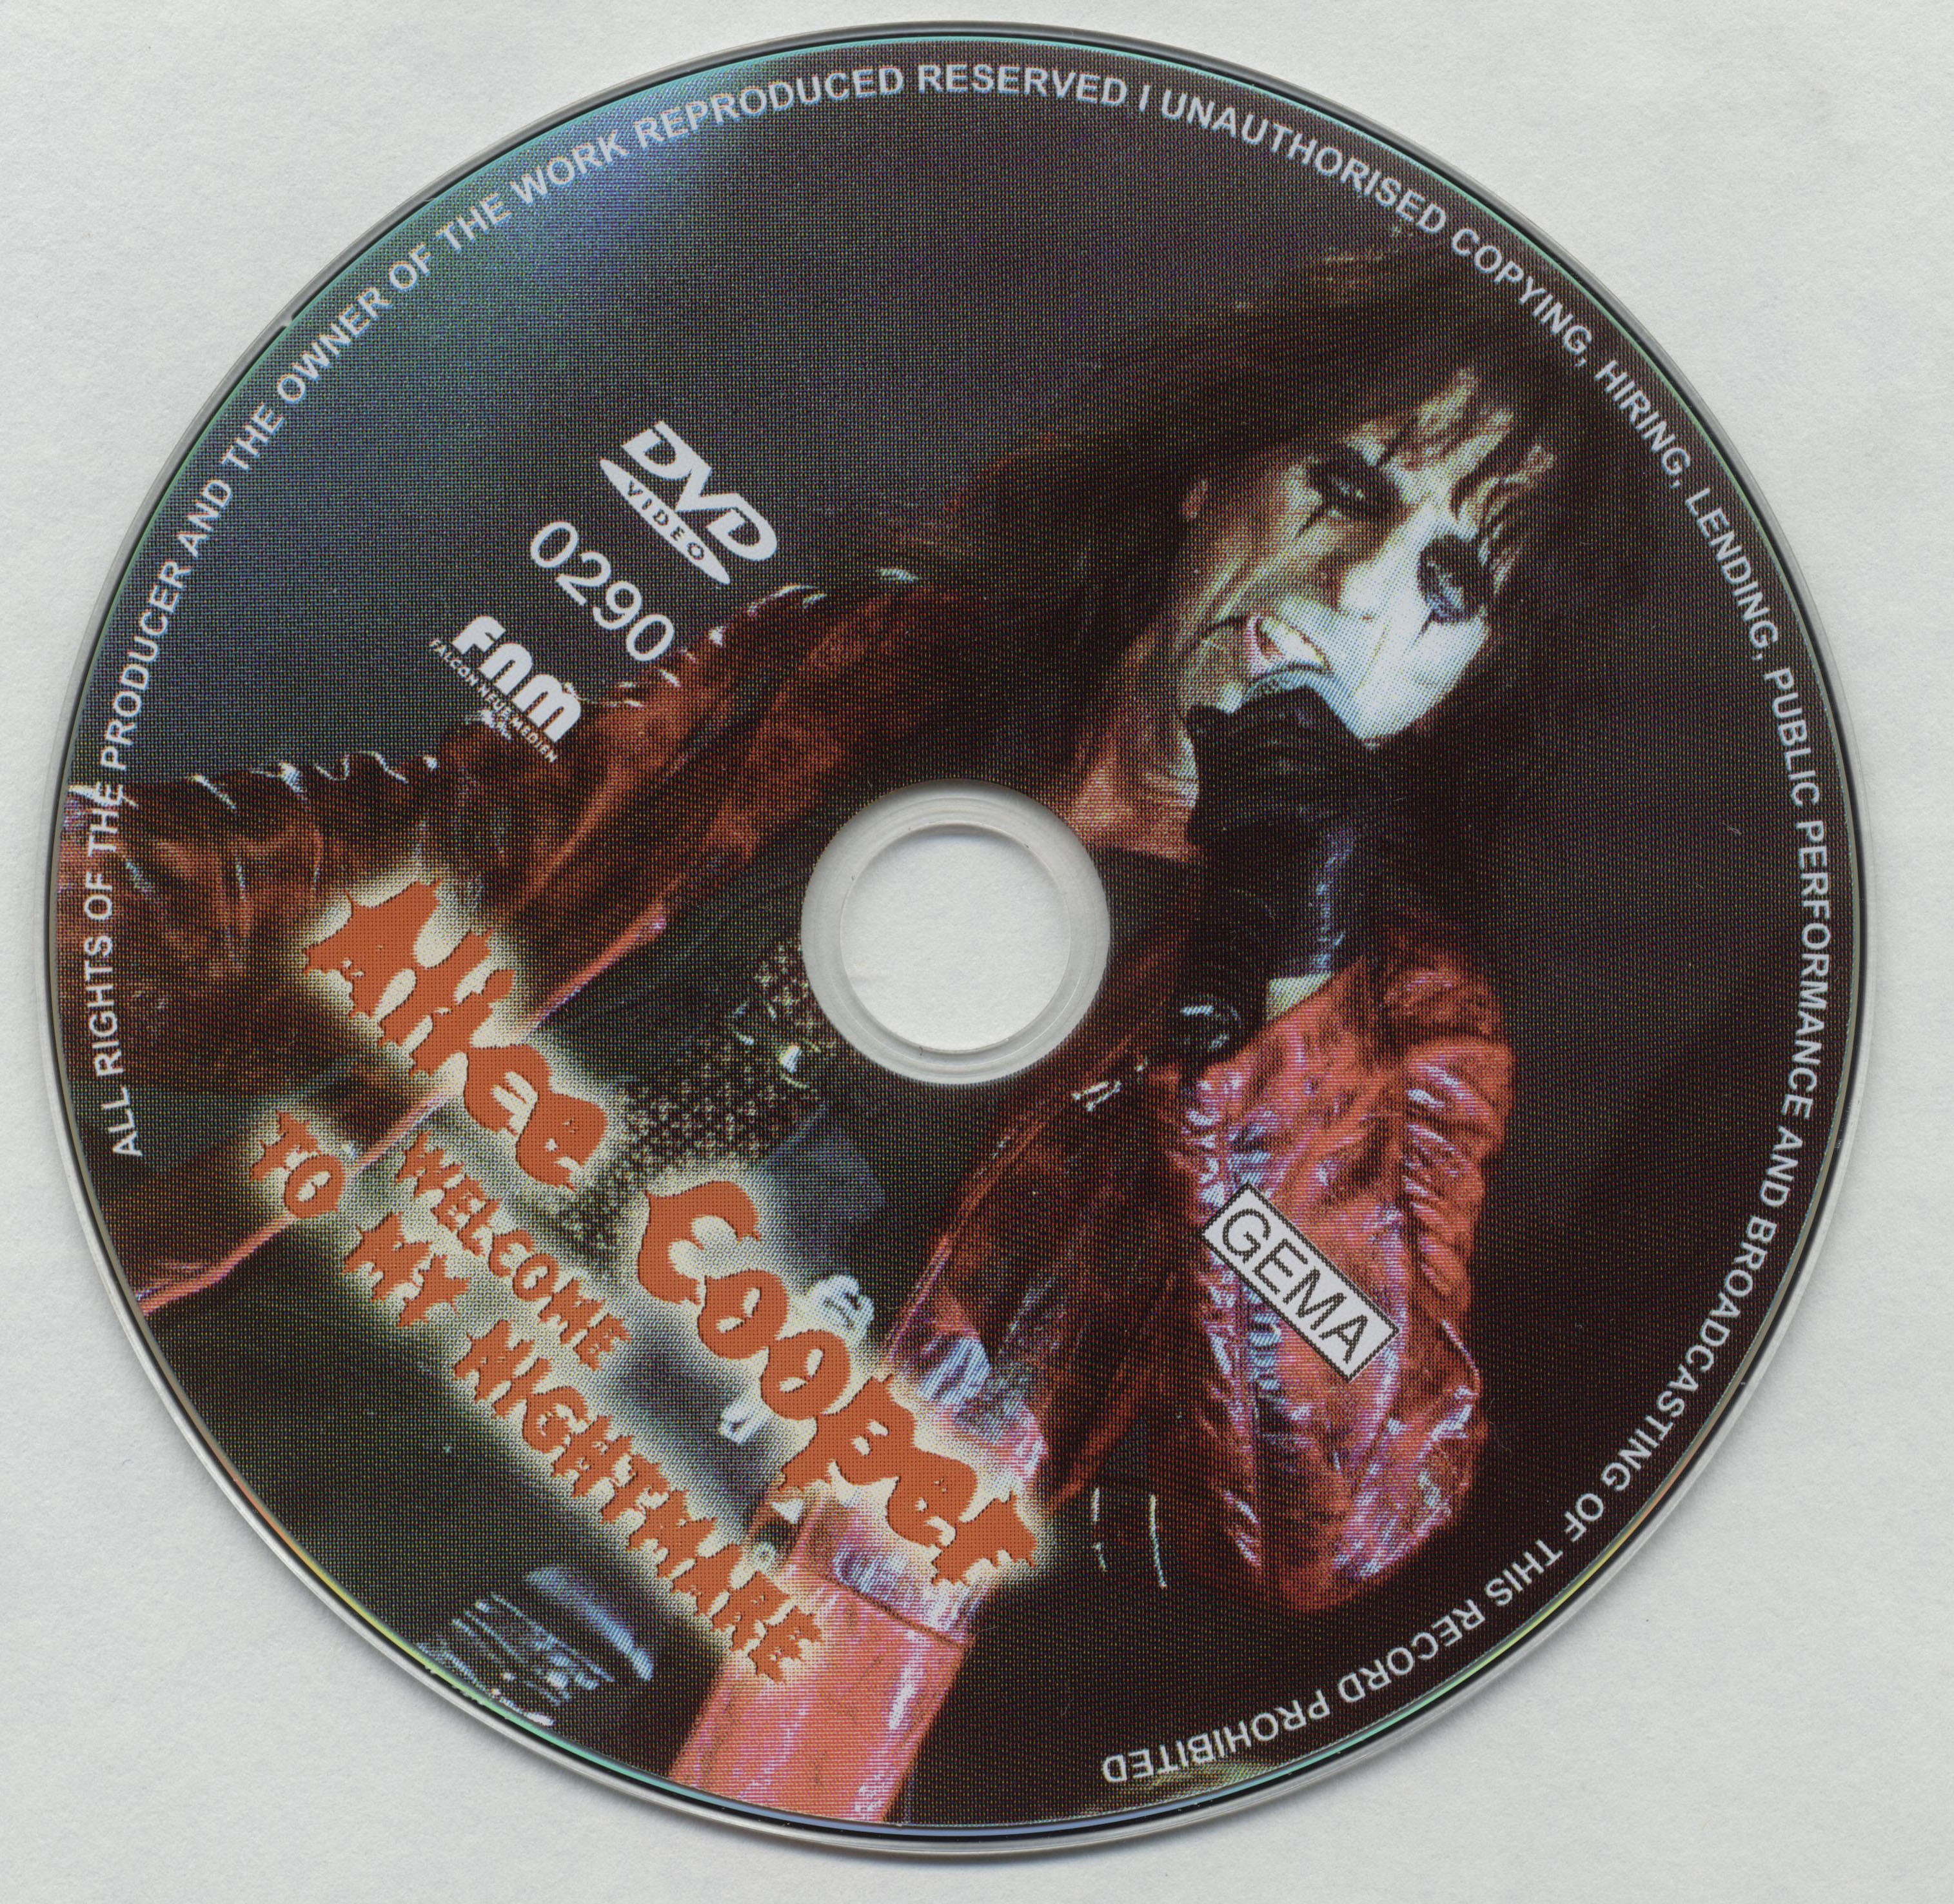 Alice Cooper welcome to my nigthmare